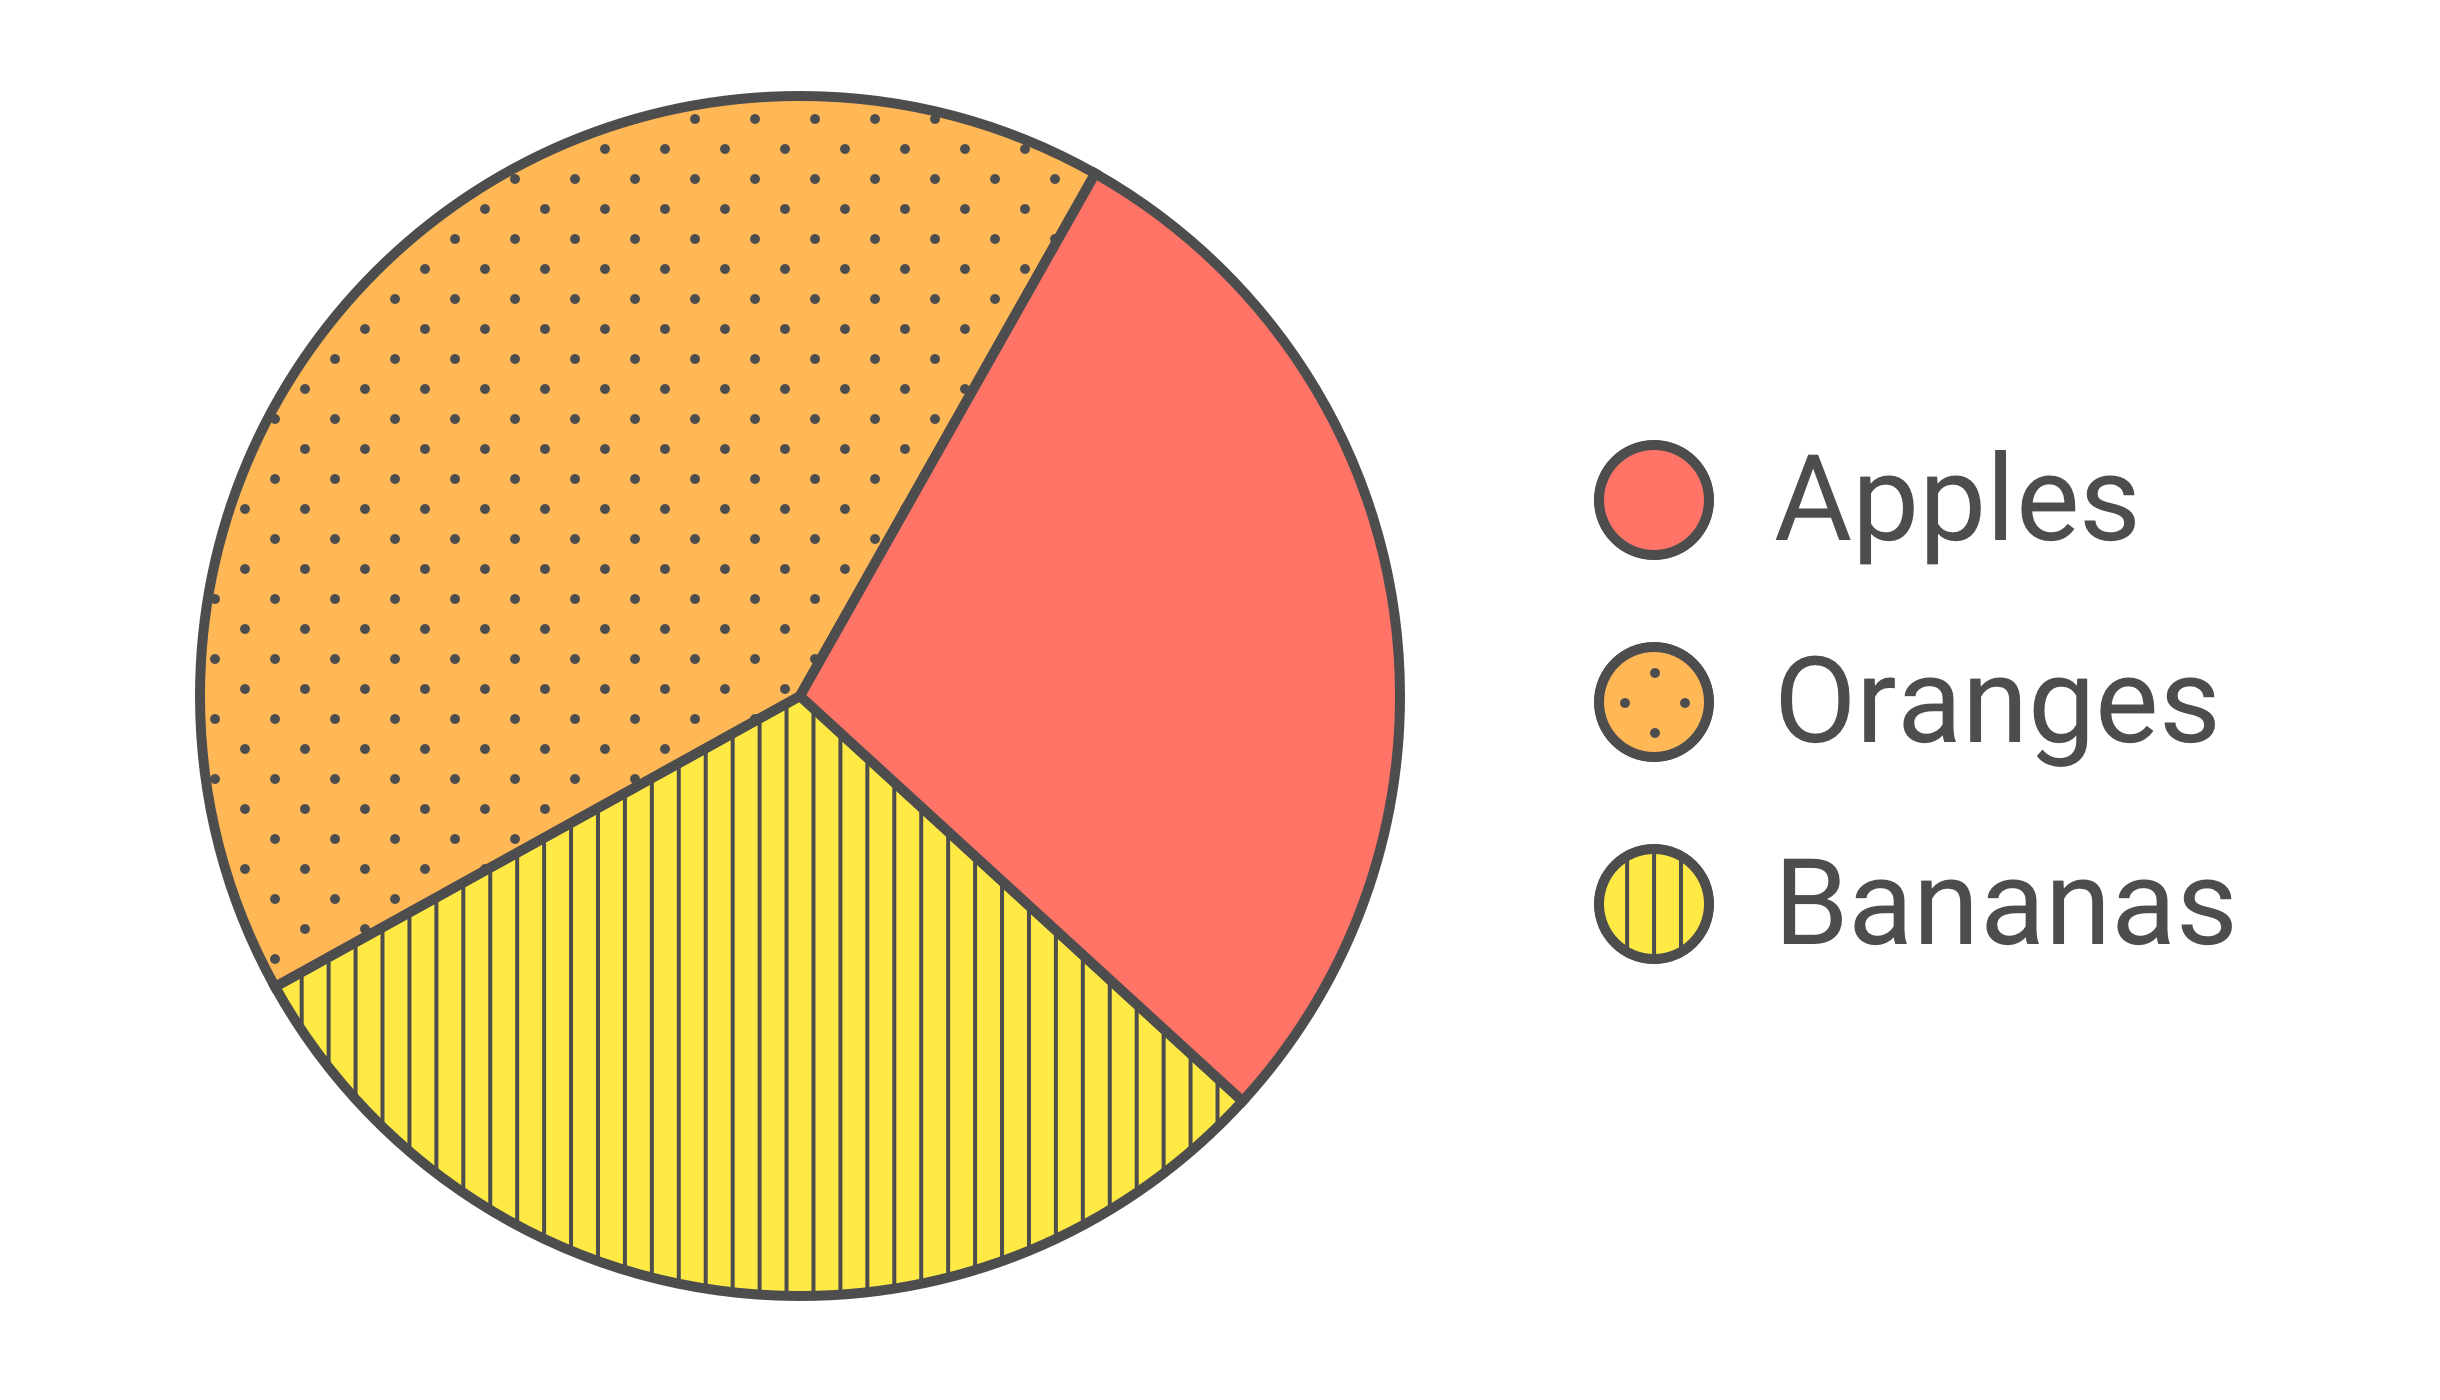 The same pie chart, now with dots filling one section and lines filling another